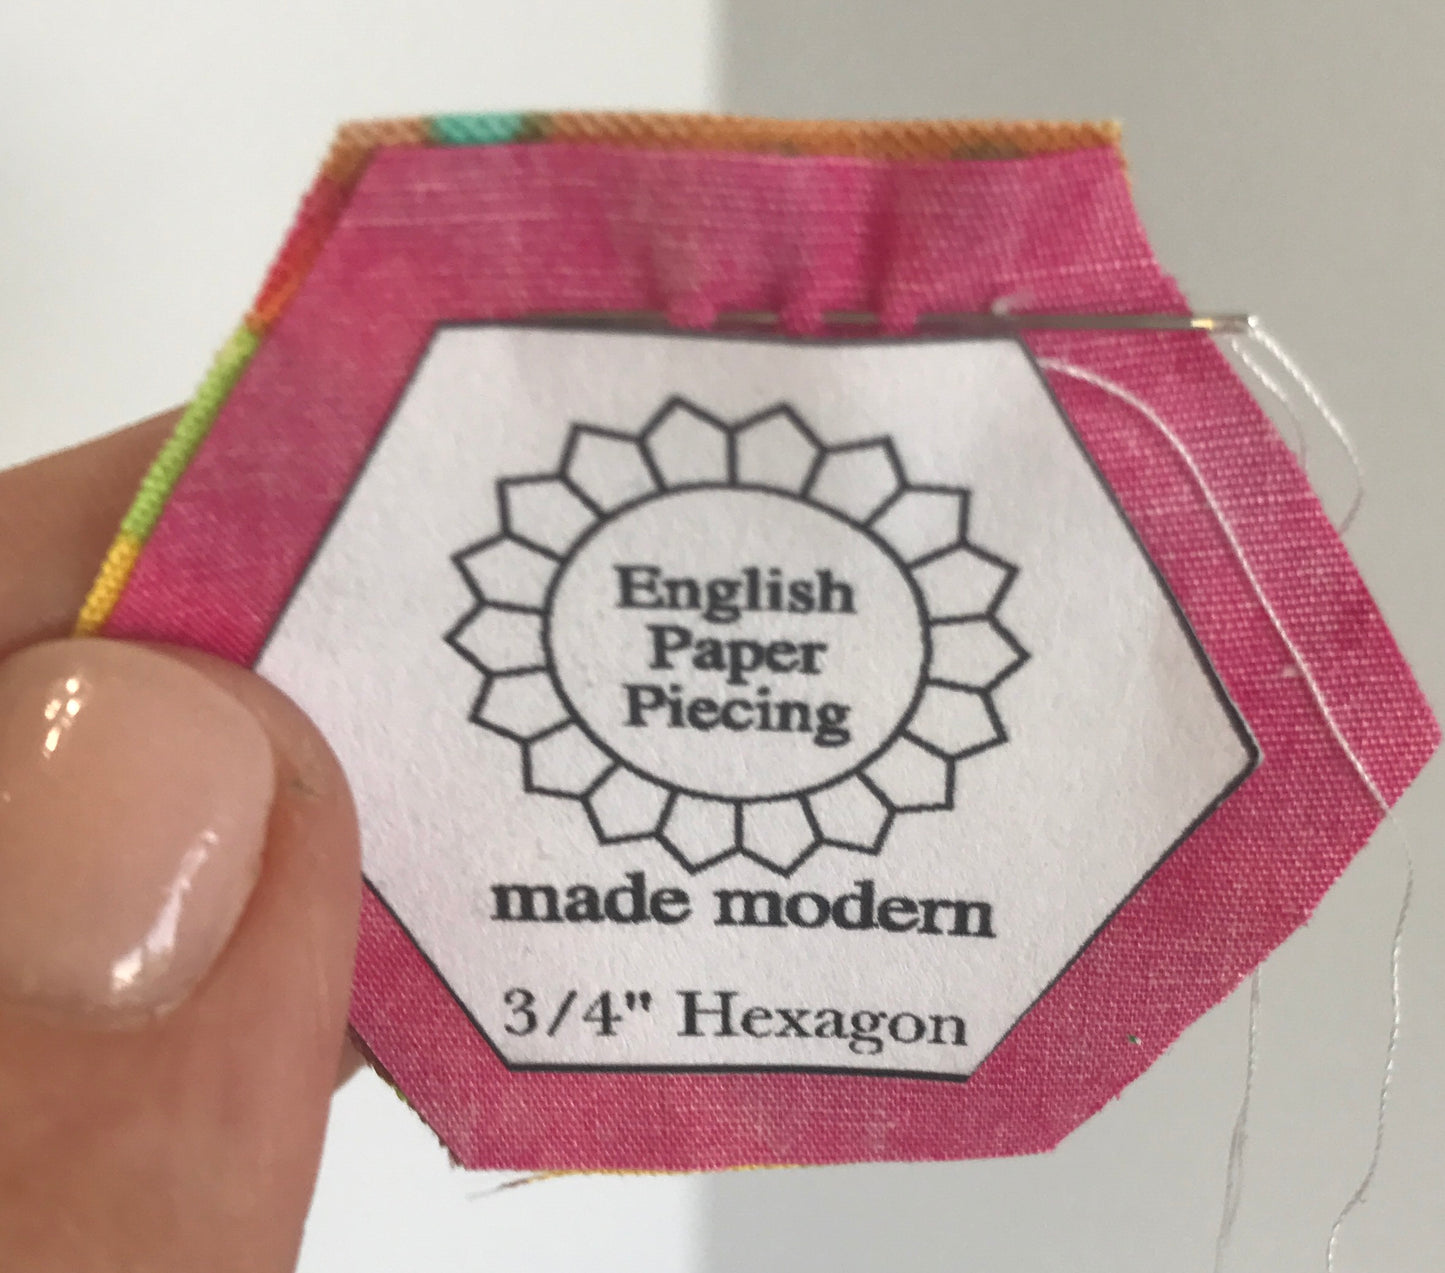 English Paper PIecing Made Easy straight stitch by hand